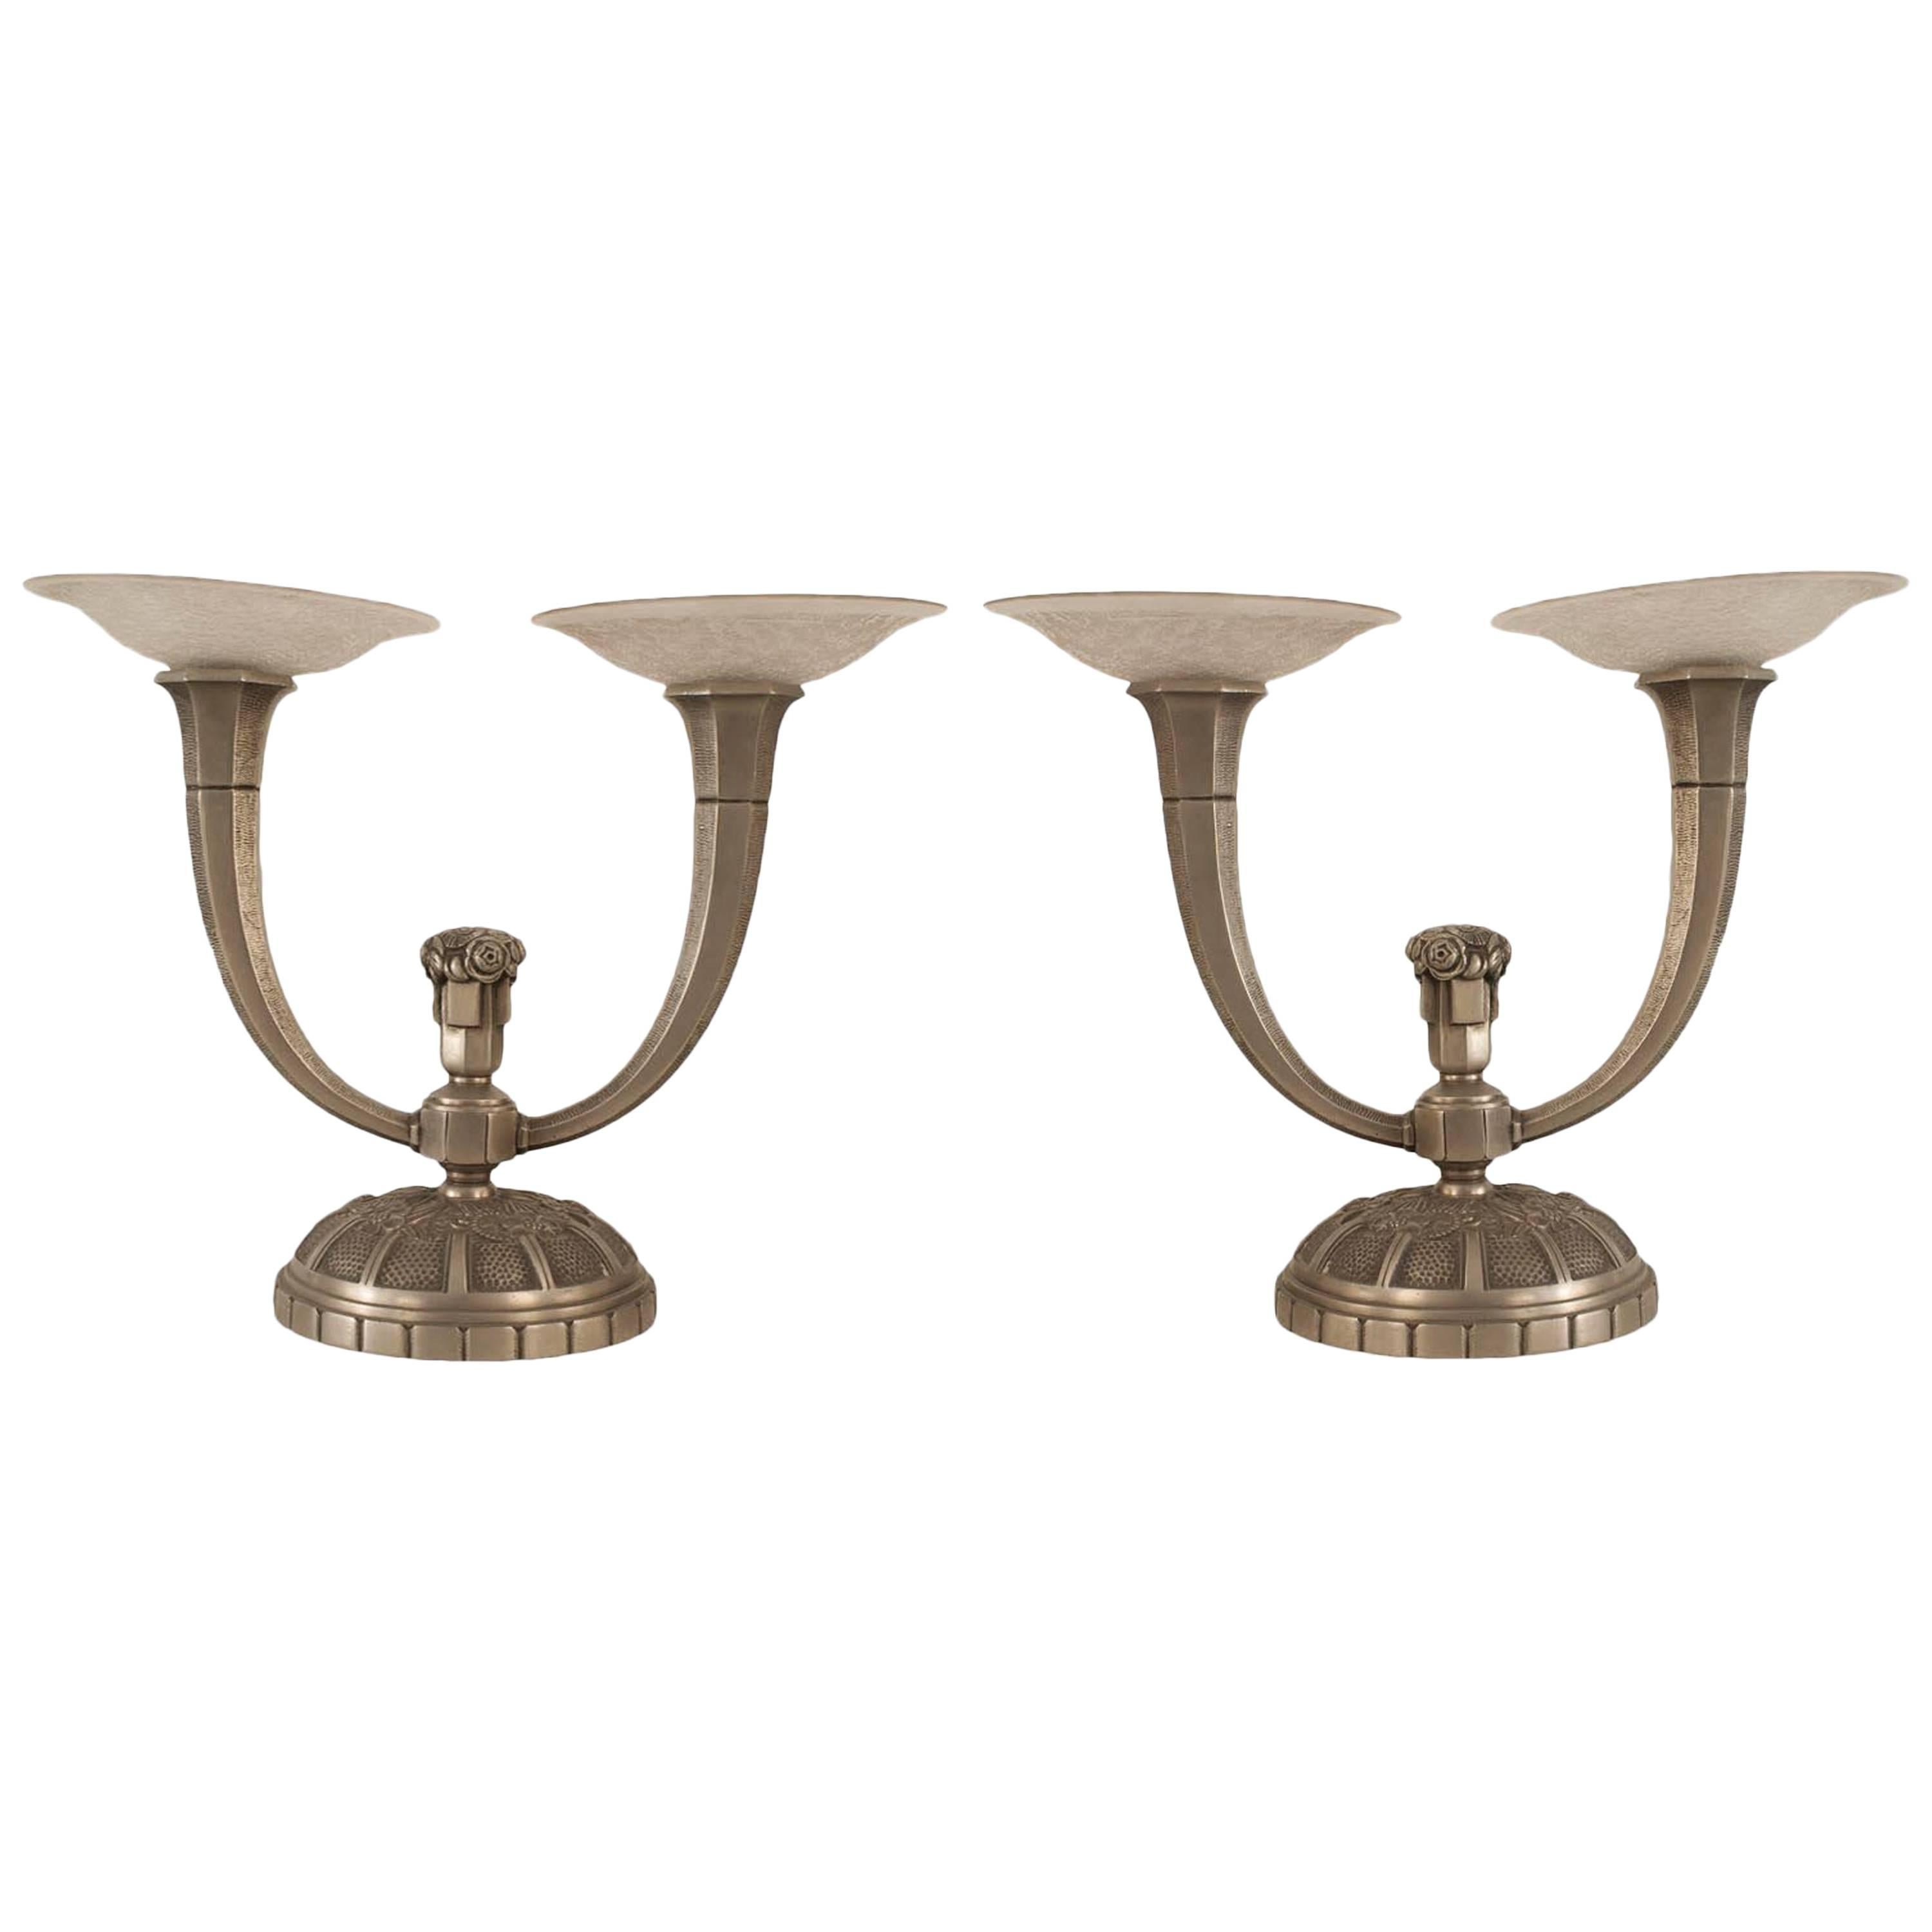 Pair of French Art Deco Candelabras For Sale